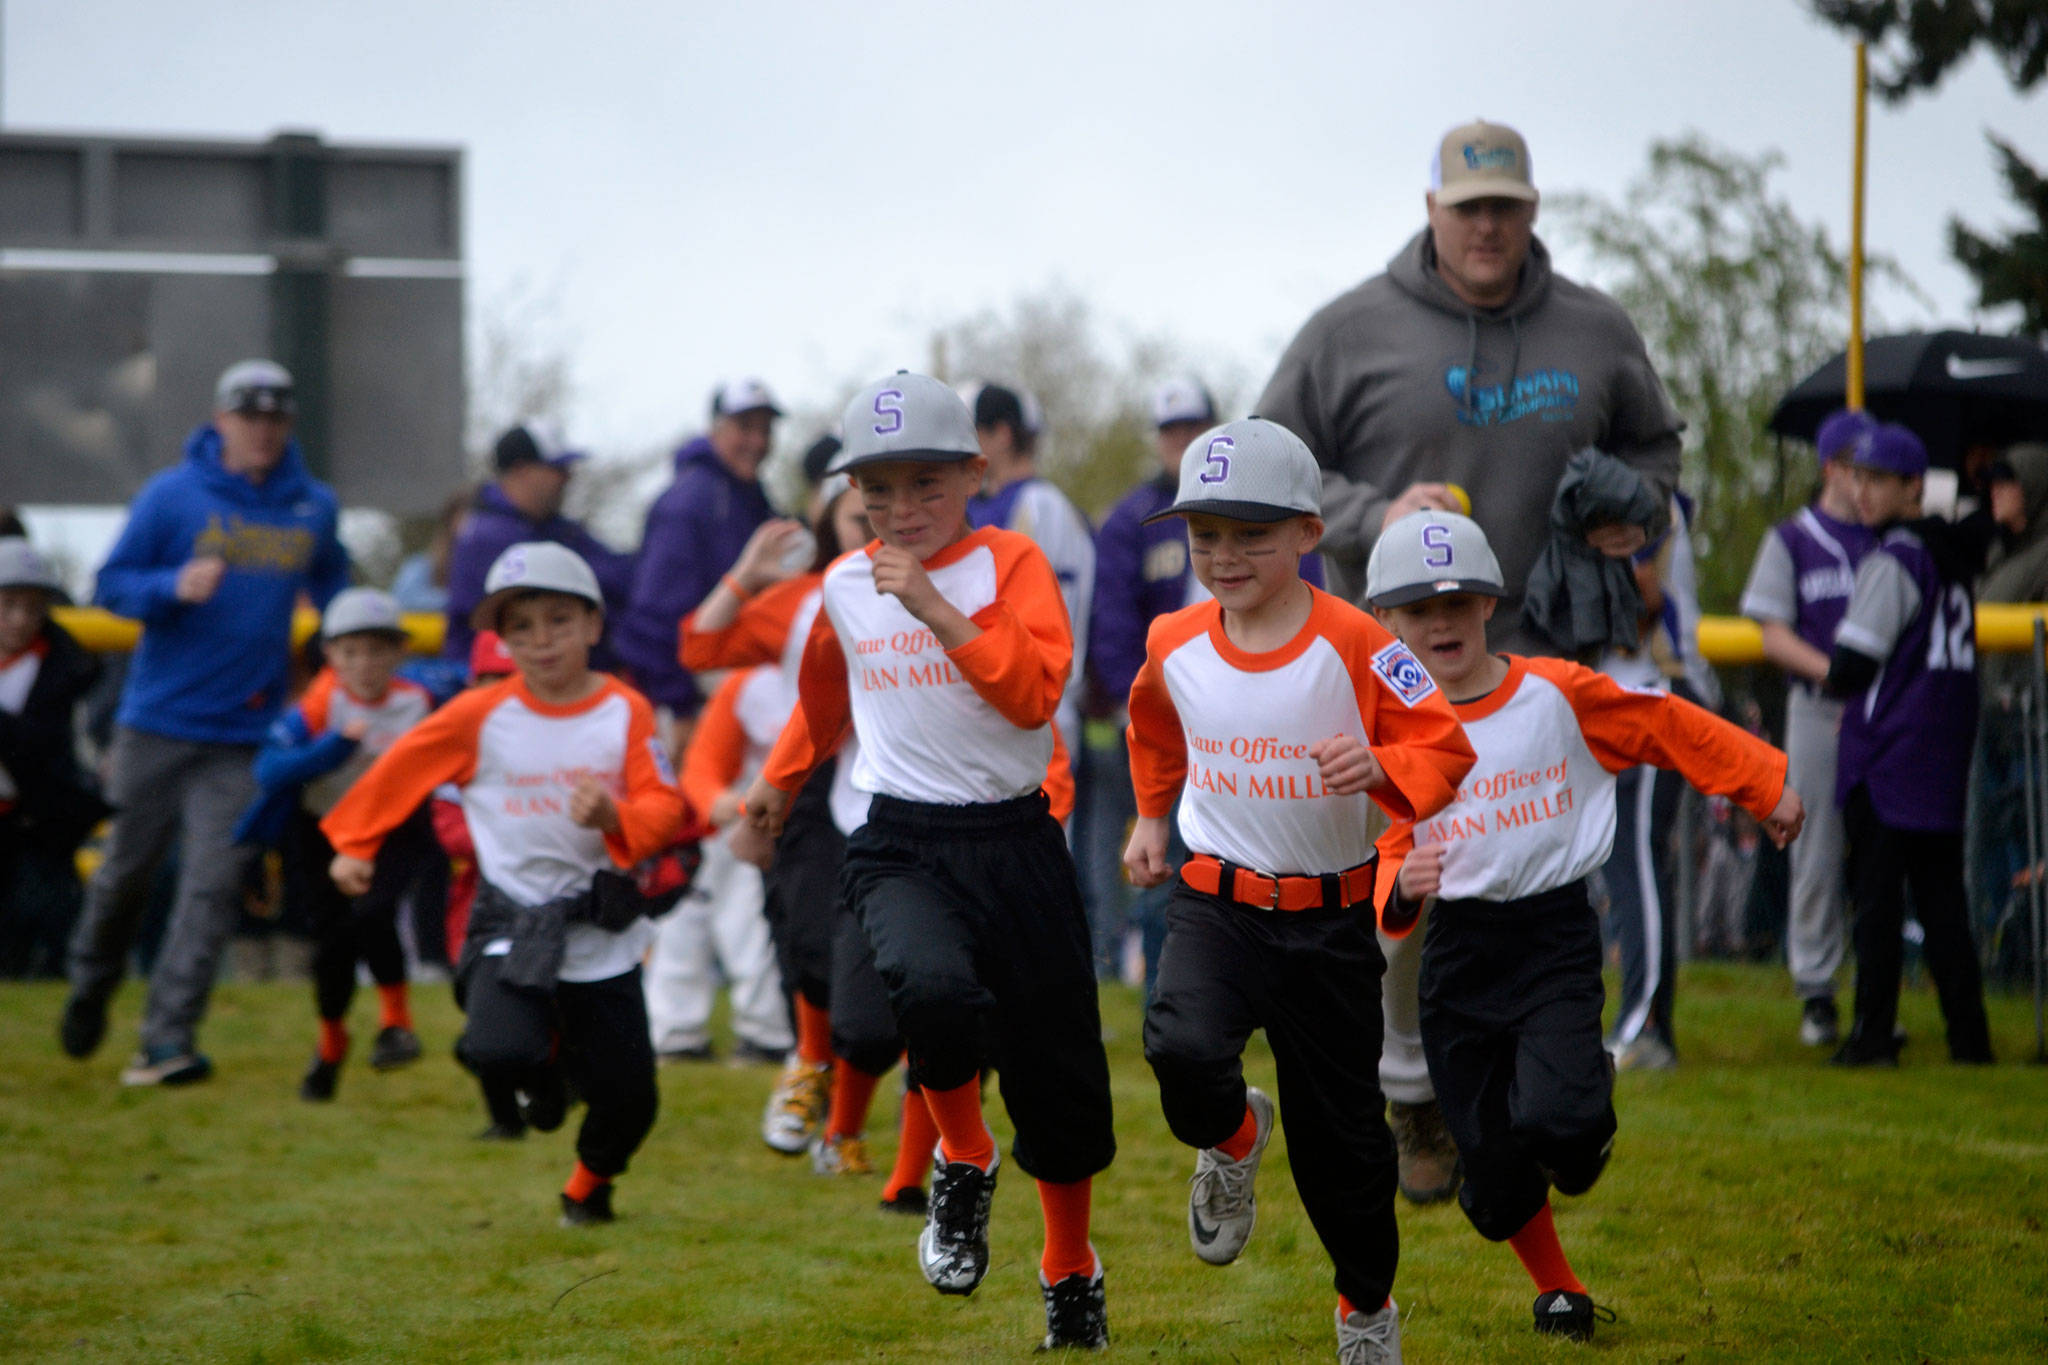 Players and coaches for the co-ed team of The Law Office of Alan Millet storm the field during the Player Procession at Sequim Little League’s Opening Day in April 2019. Sequim Gazette file photo by Matthew Nash